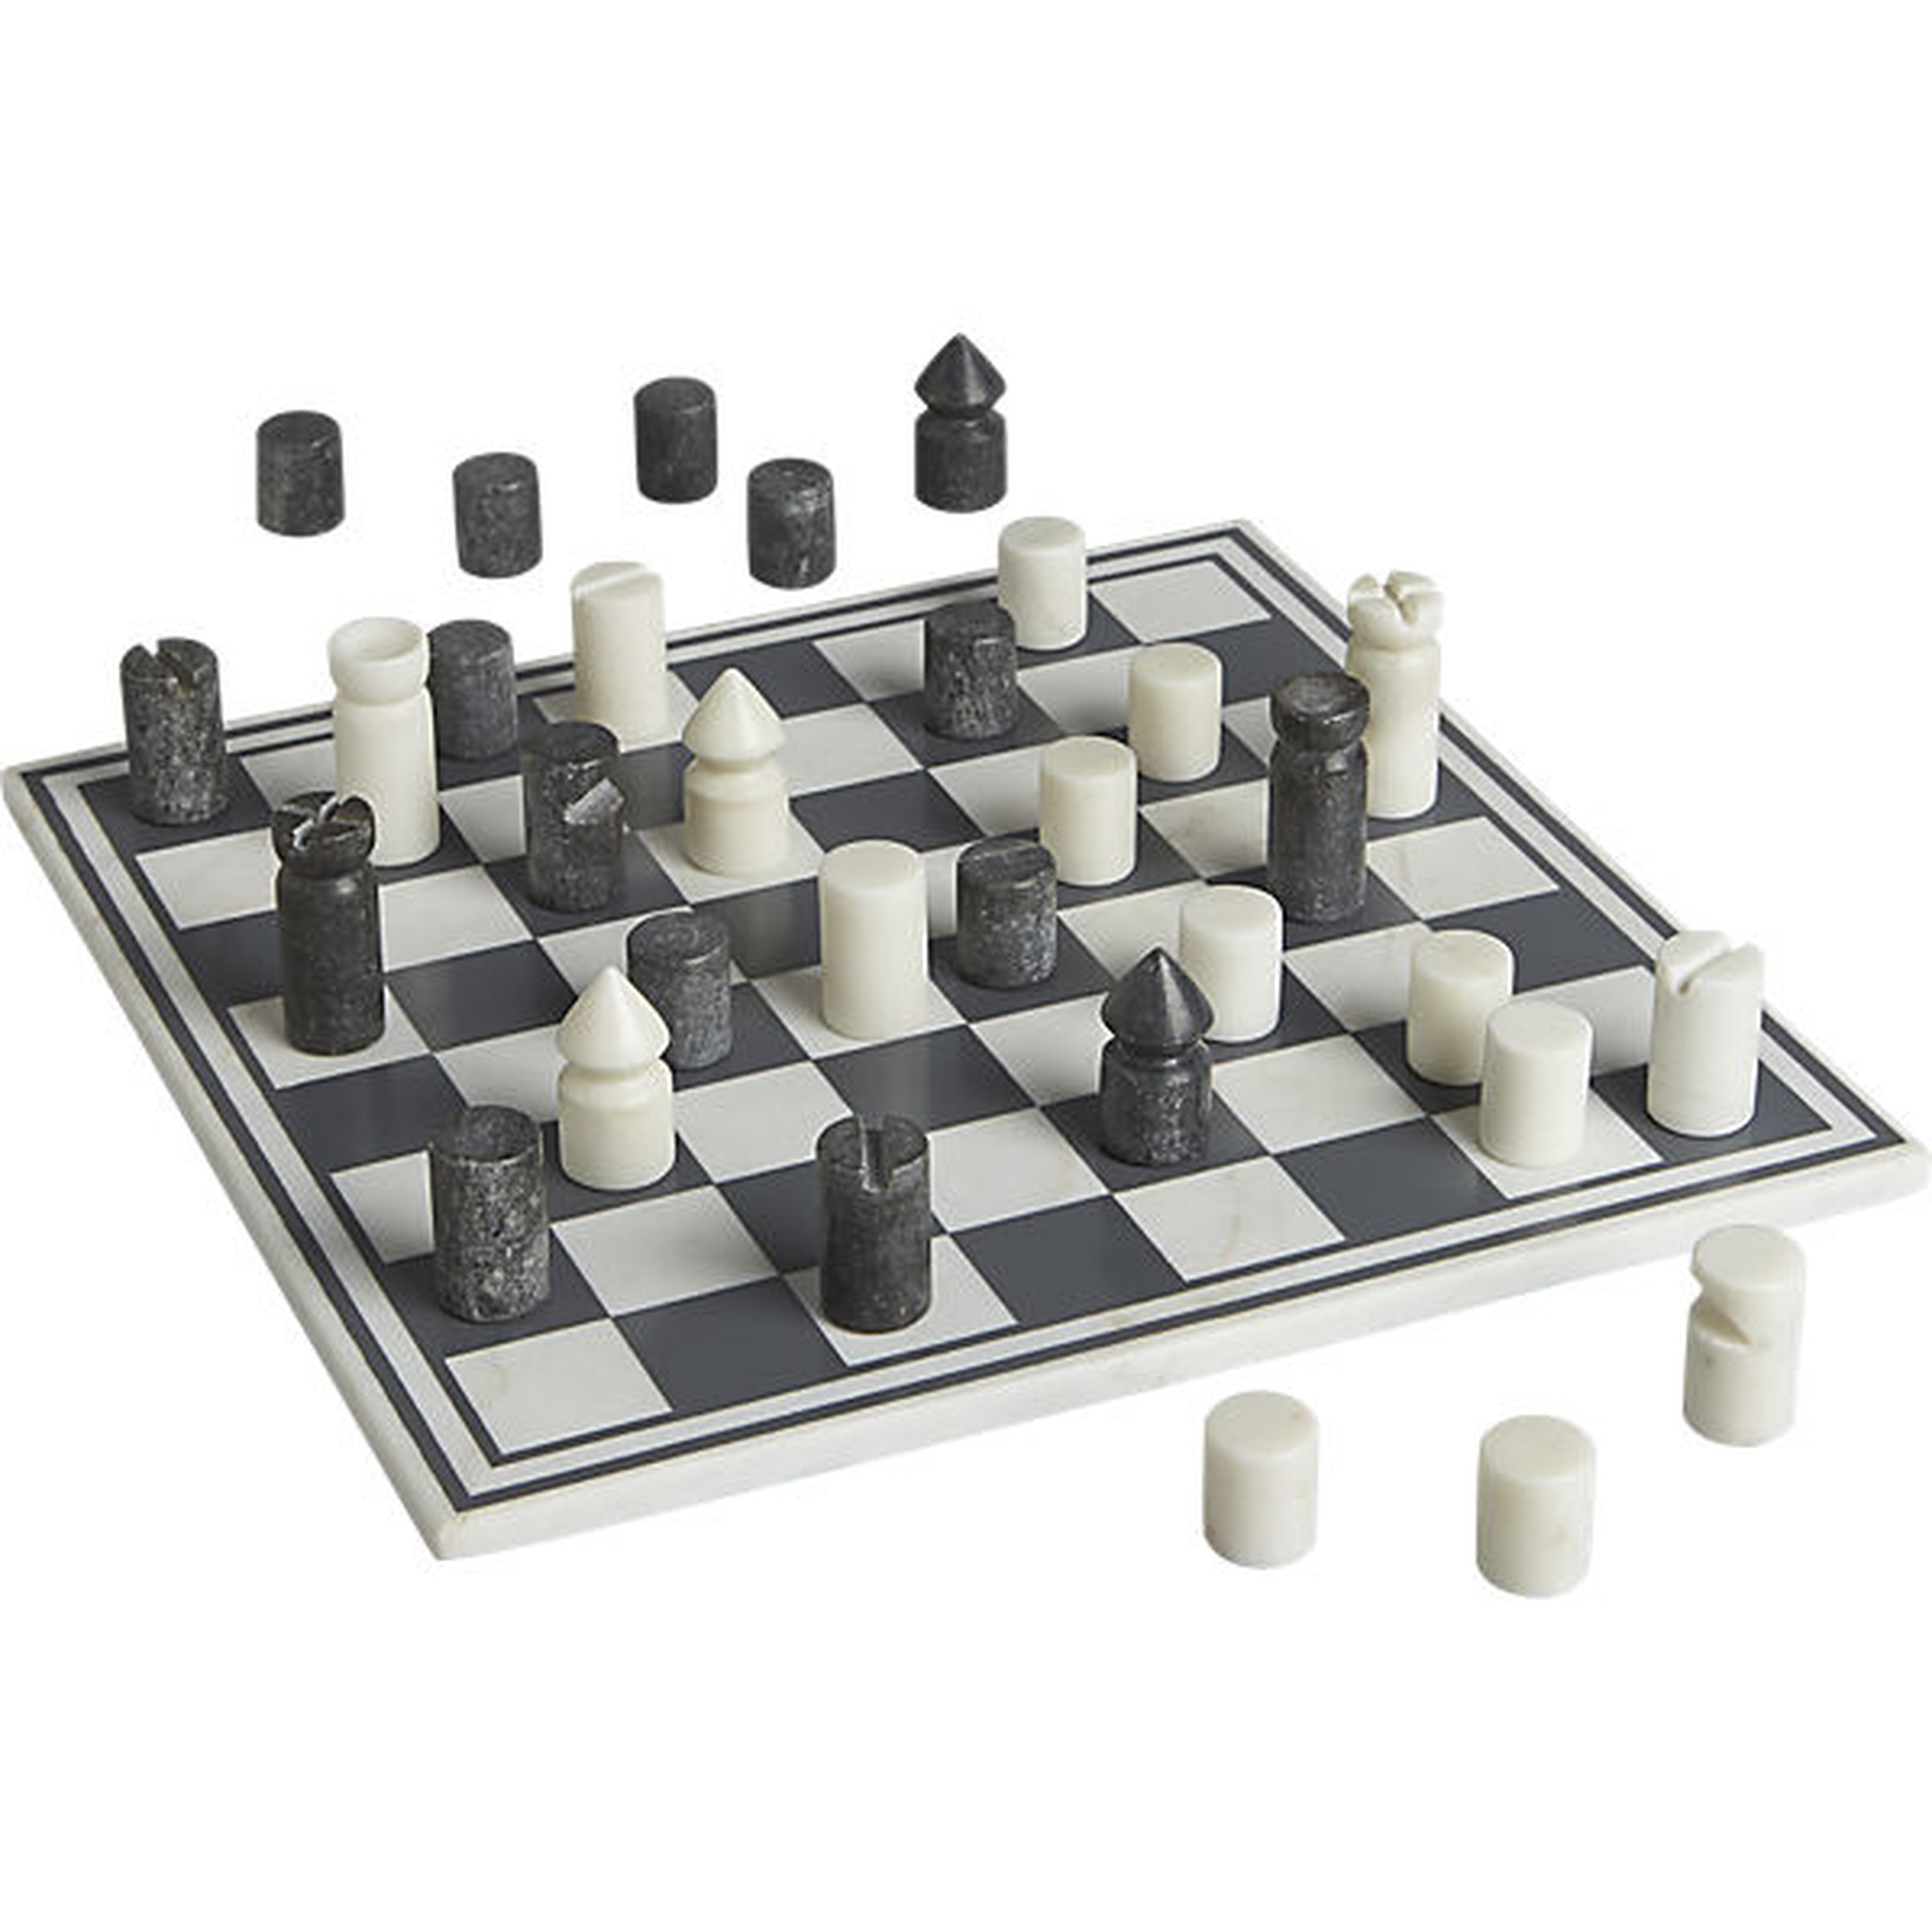 Marble chess game - CB2